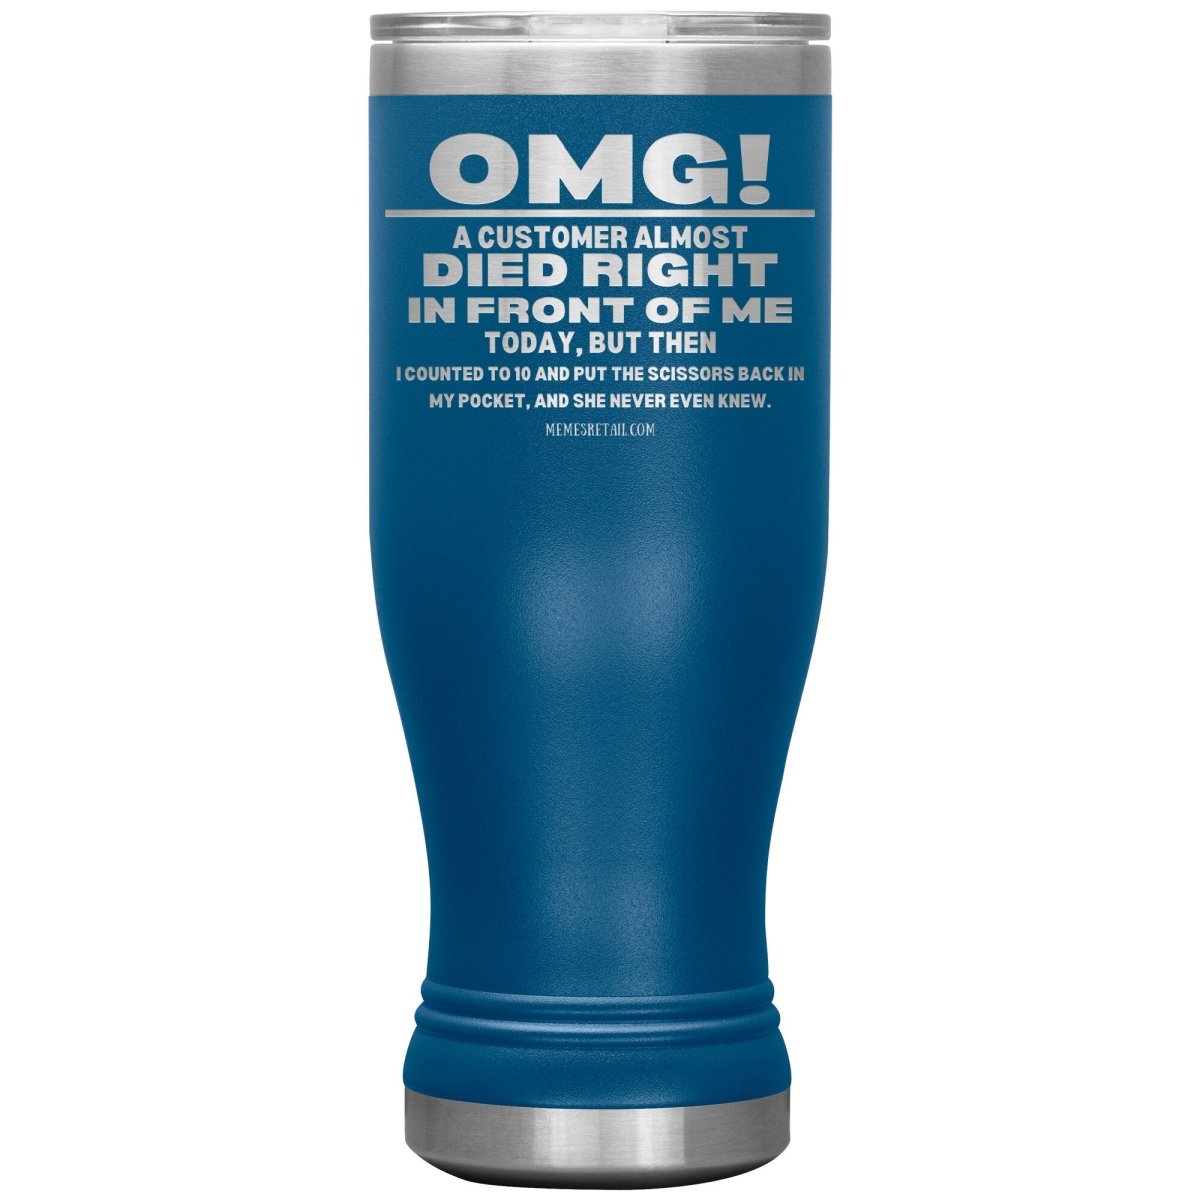 OMG! A Customer Almost Died Right In Front Of Me Tumbler, 20oz BOHO Insulated Tumbler / Blue - MemesRetail.com